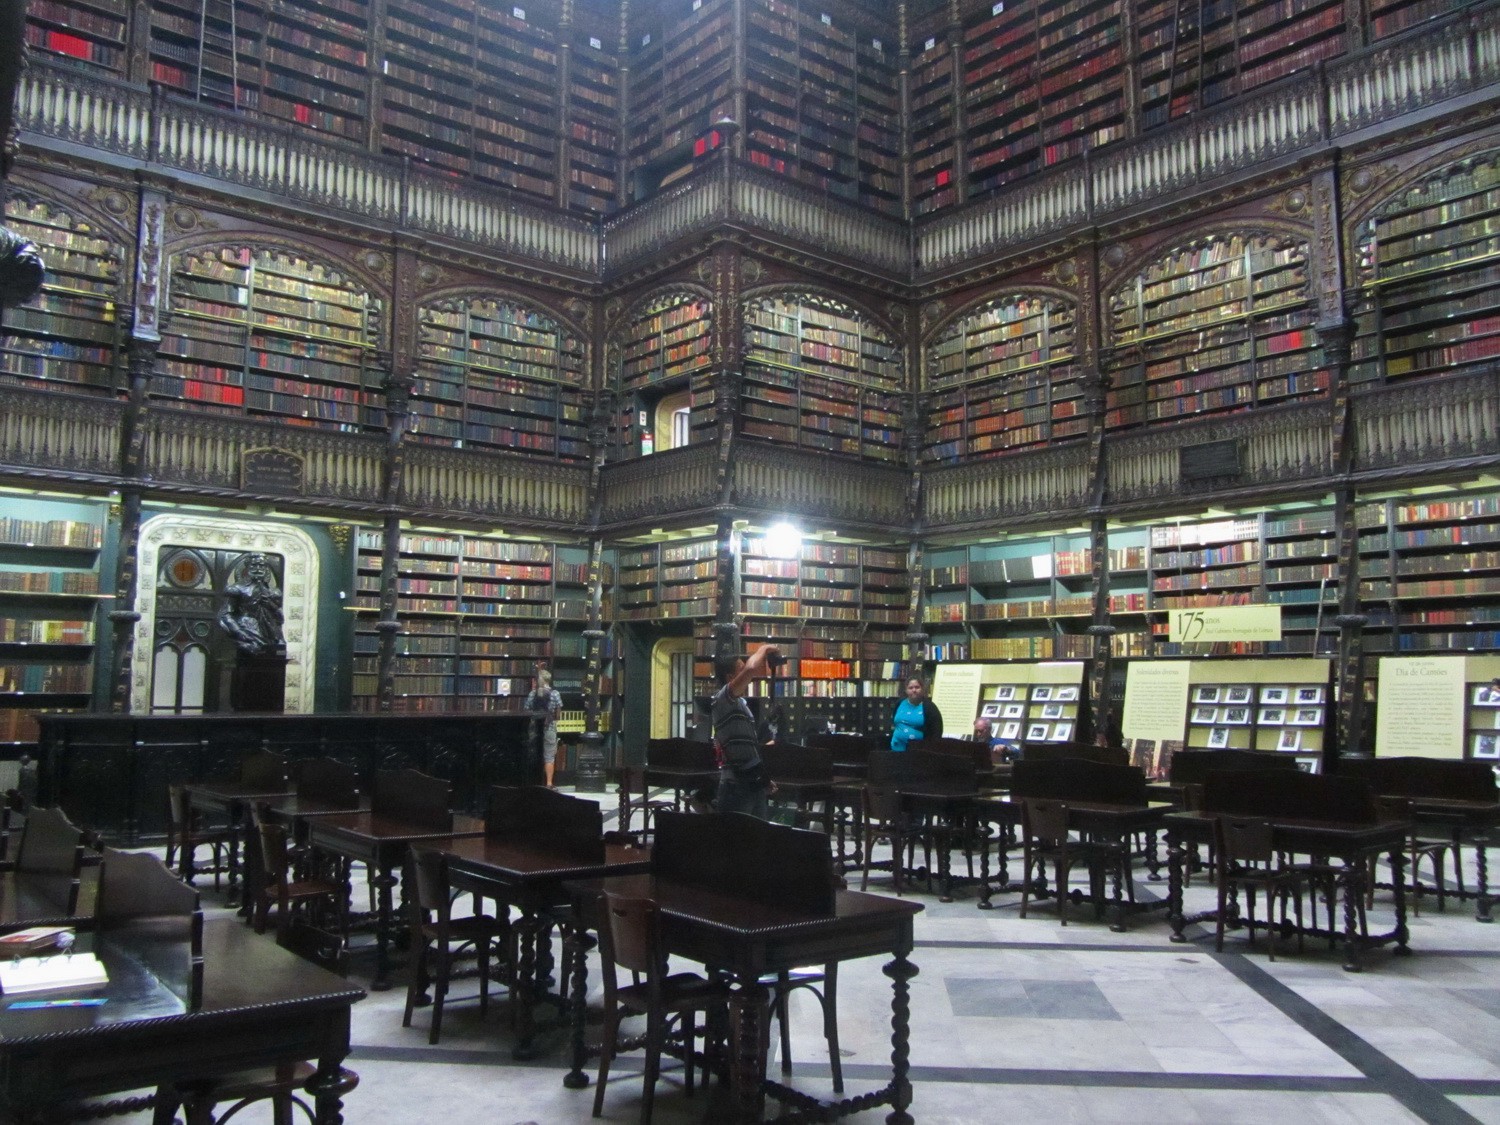 In the huge library